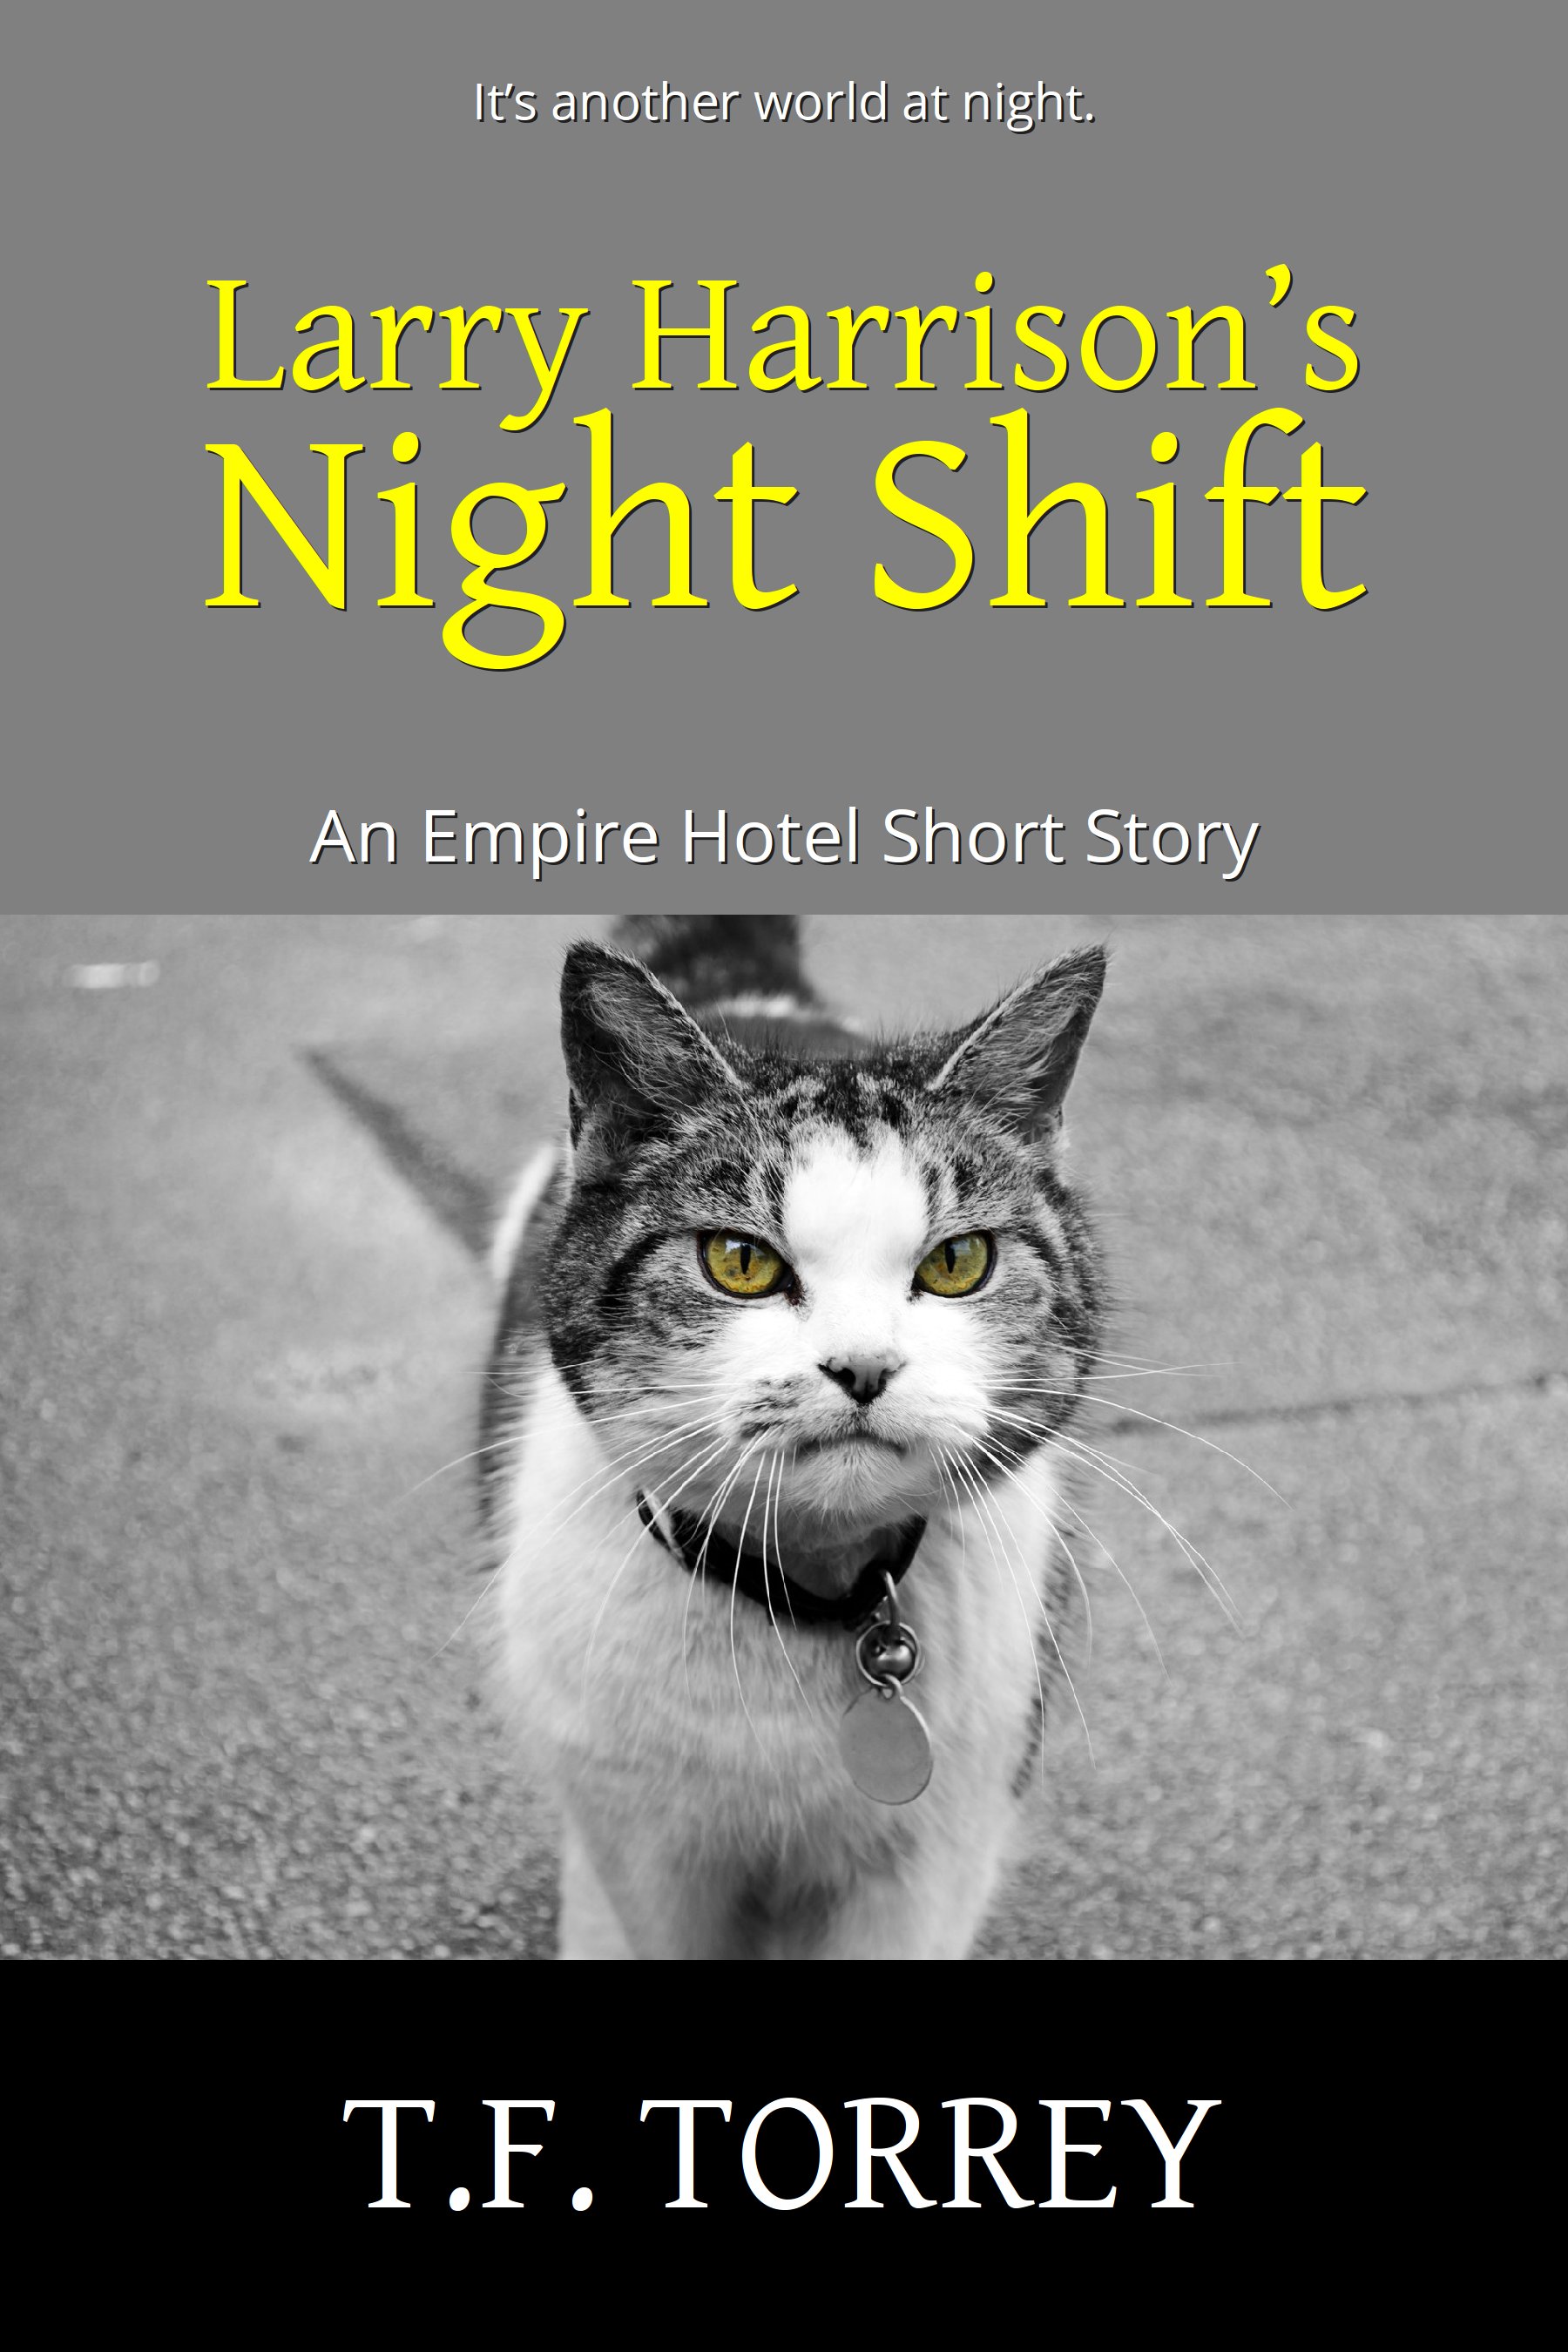 Cover of Larry Harrison's Night Shift: An Empire Hotel Short Story by T.F. Torrey